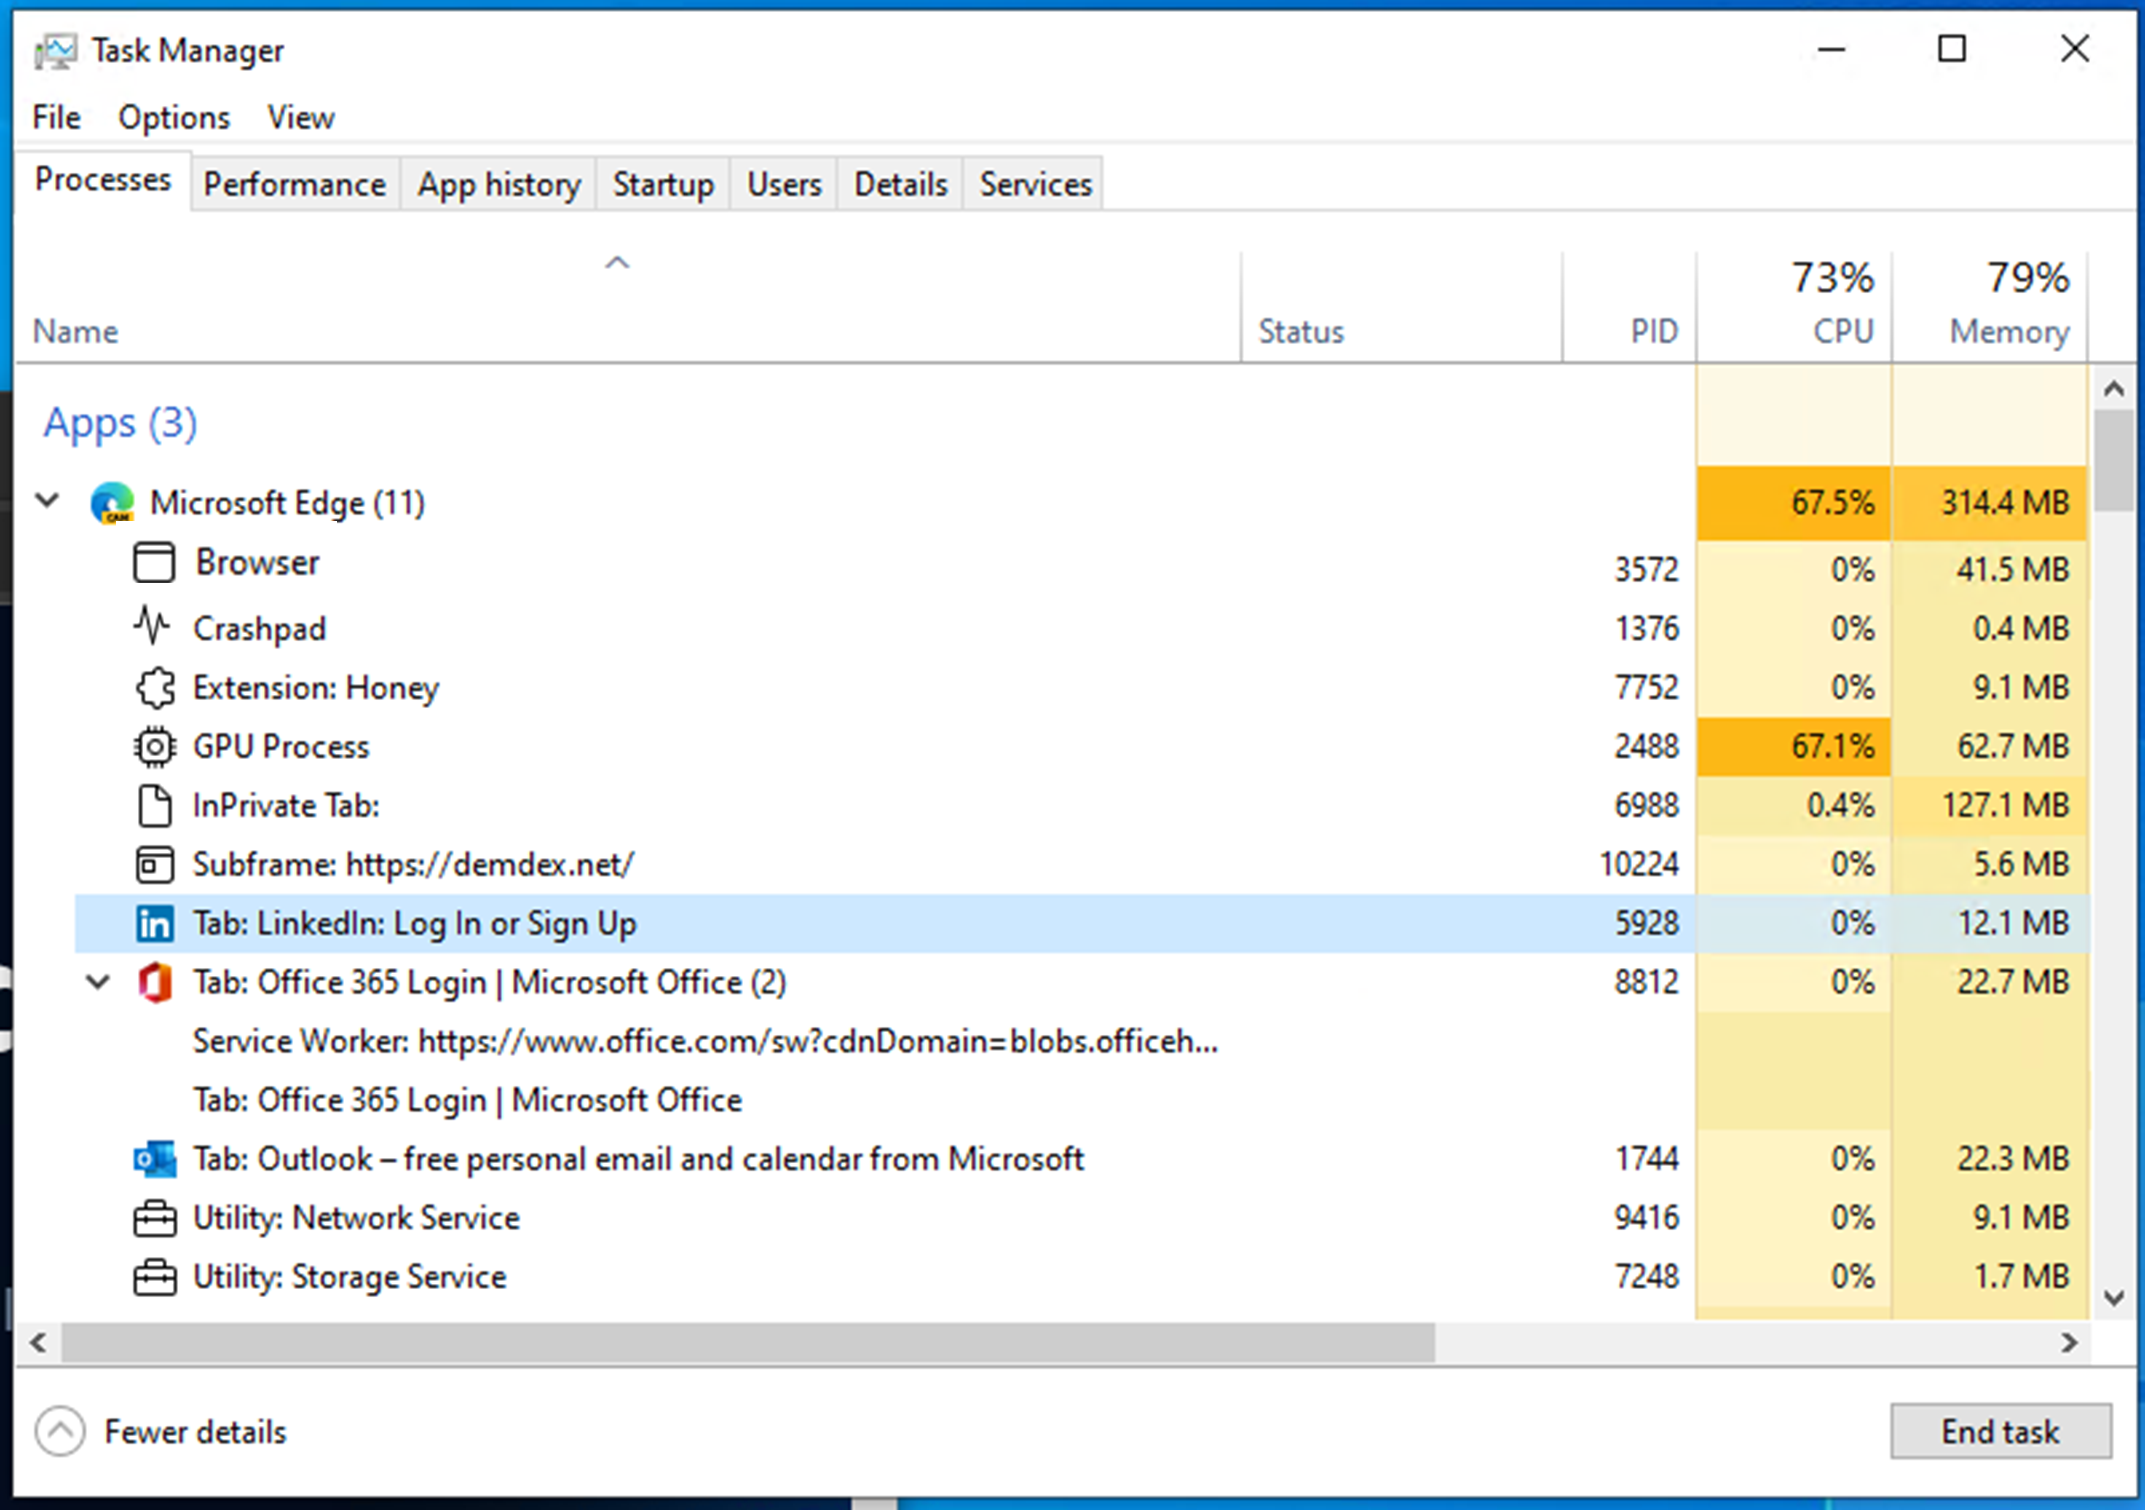 Select Task Manager from the options.
In the Task Manager window, go to the Processes tab.